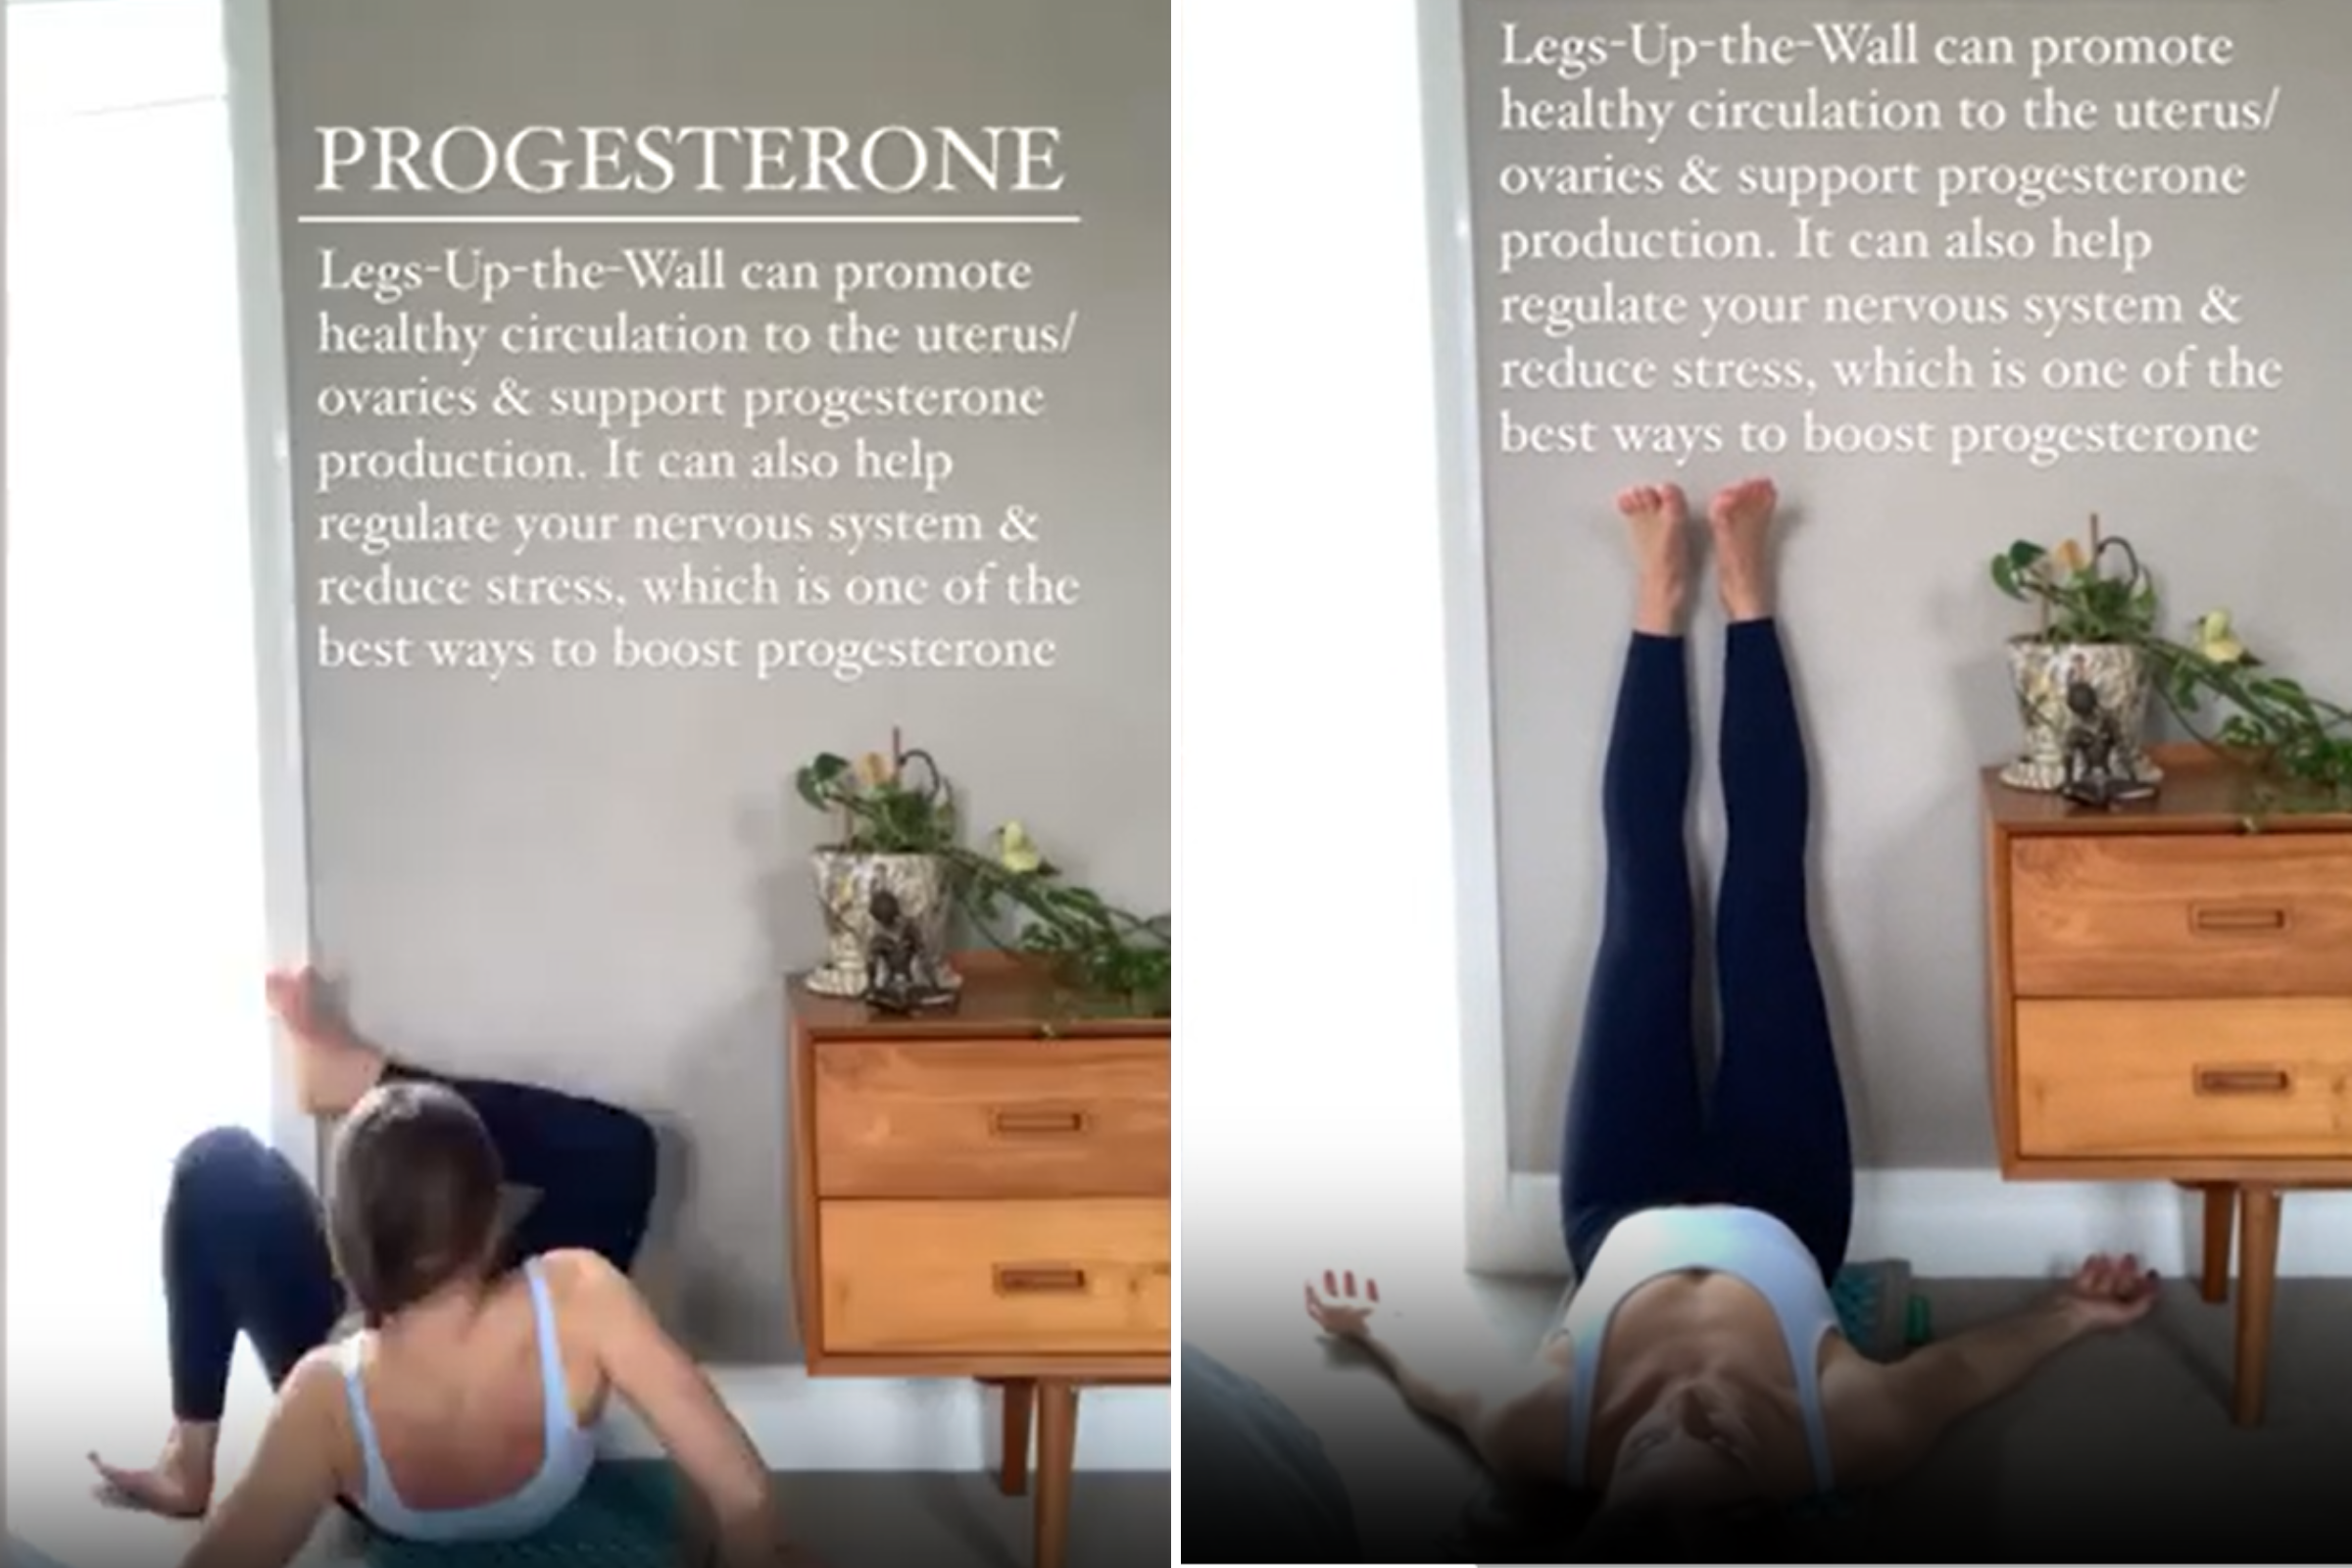 legs up wall pose Archives - In Balance Health